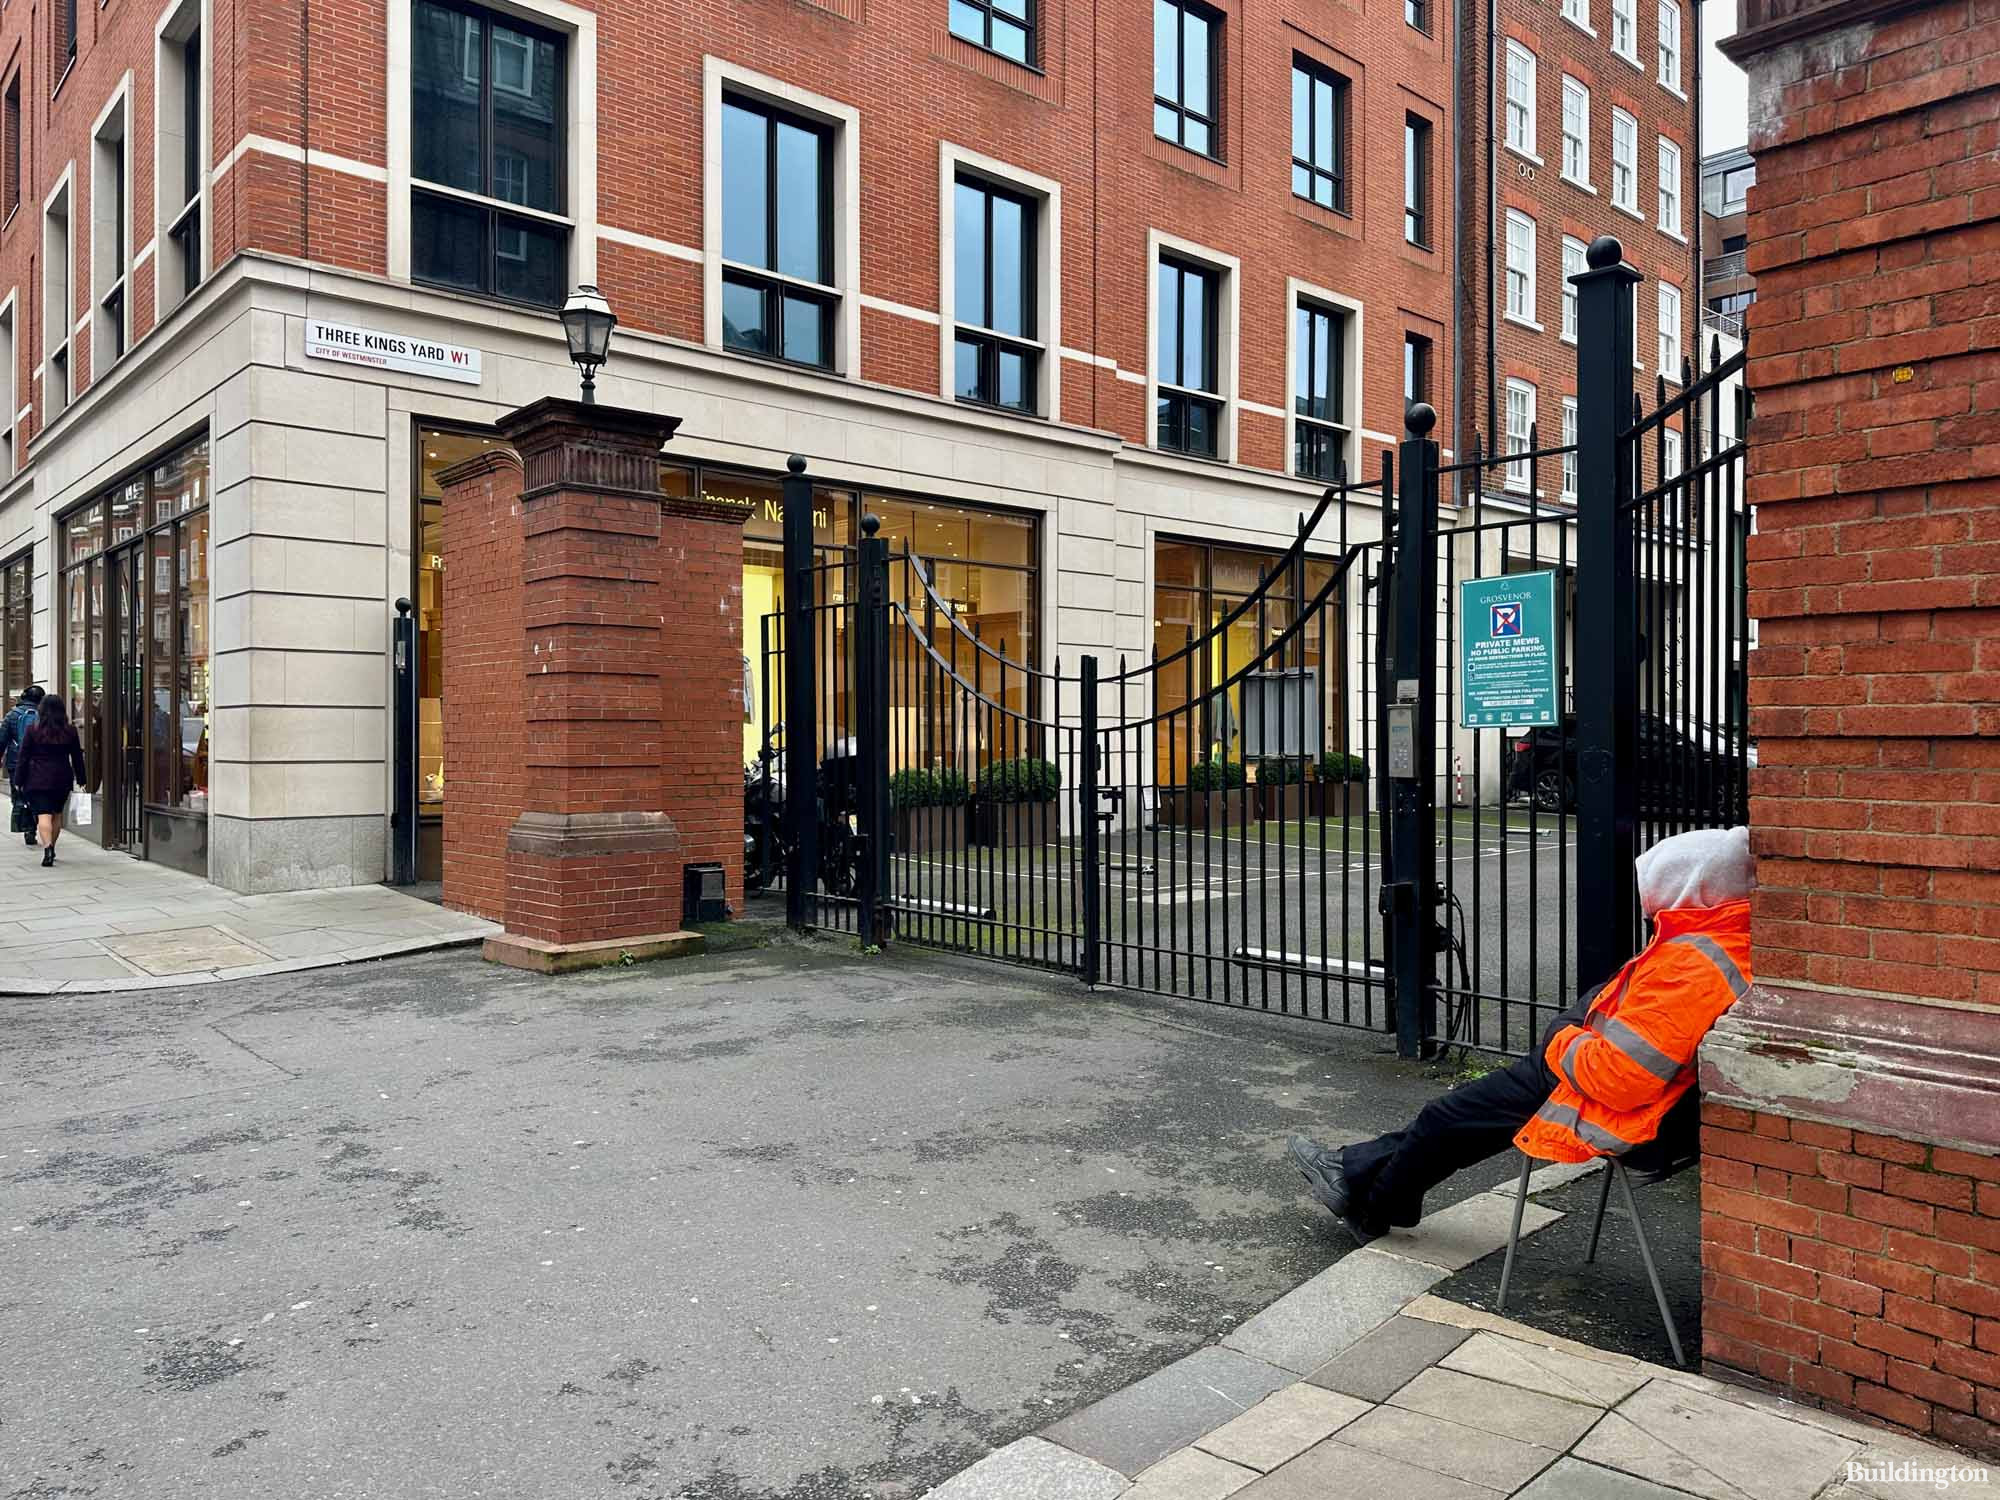 Three Kings Mayfair is within the gated Three King's Yard area in Mayfair, London W1.